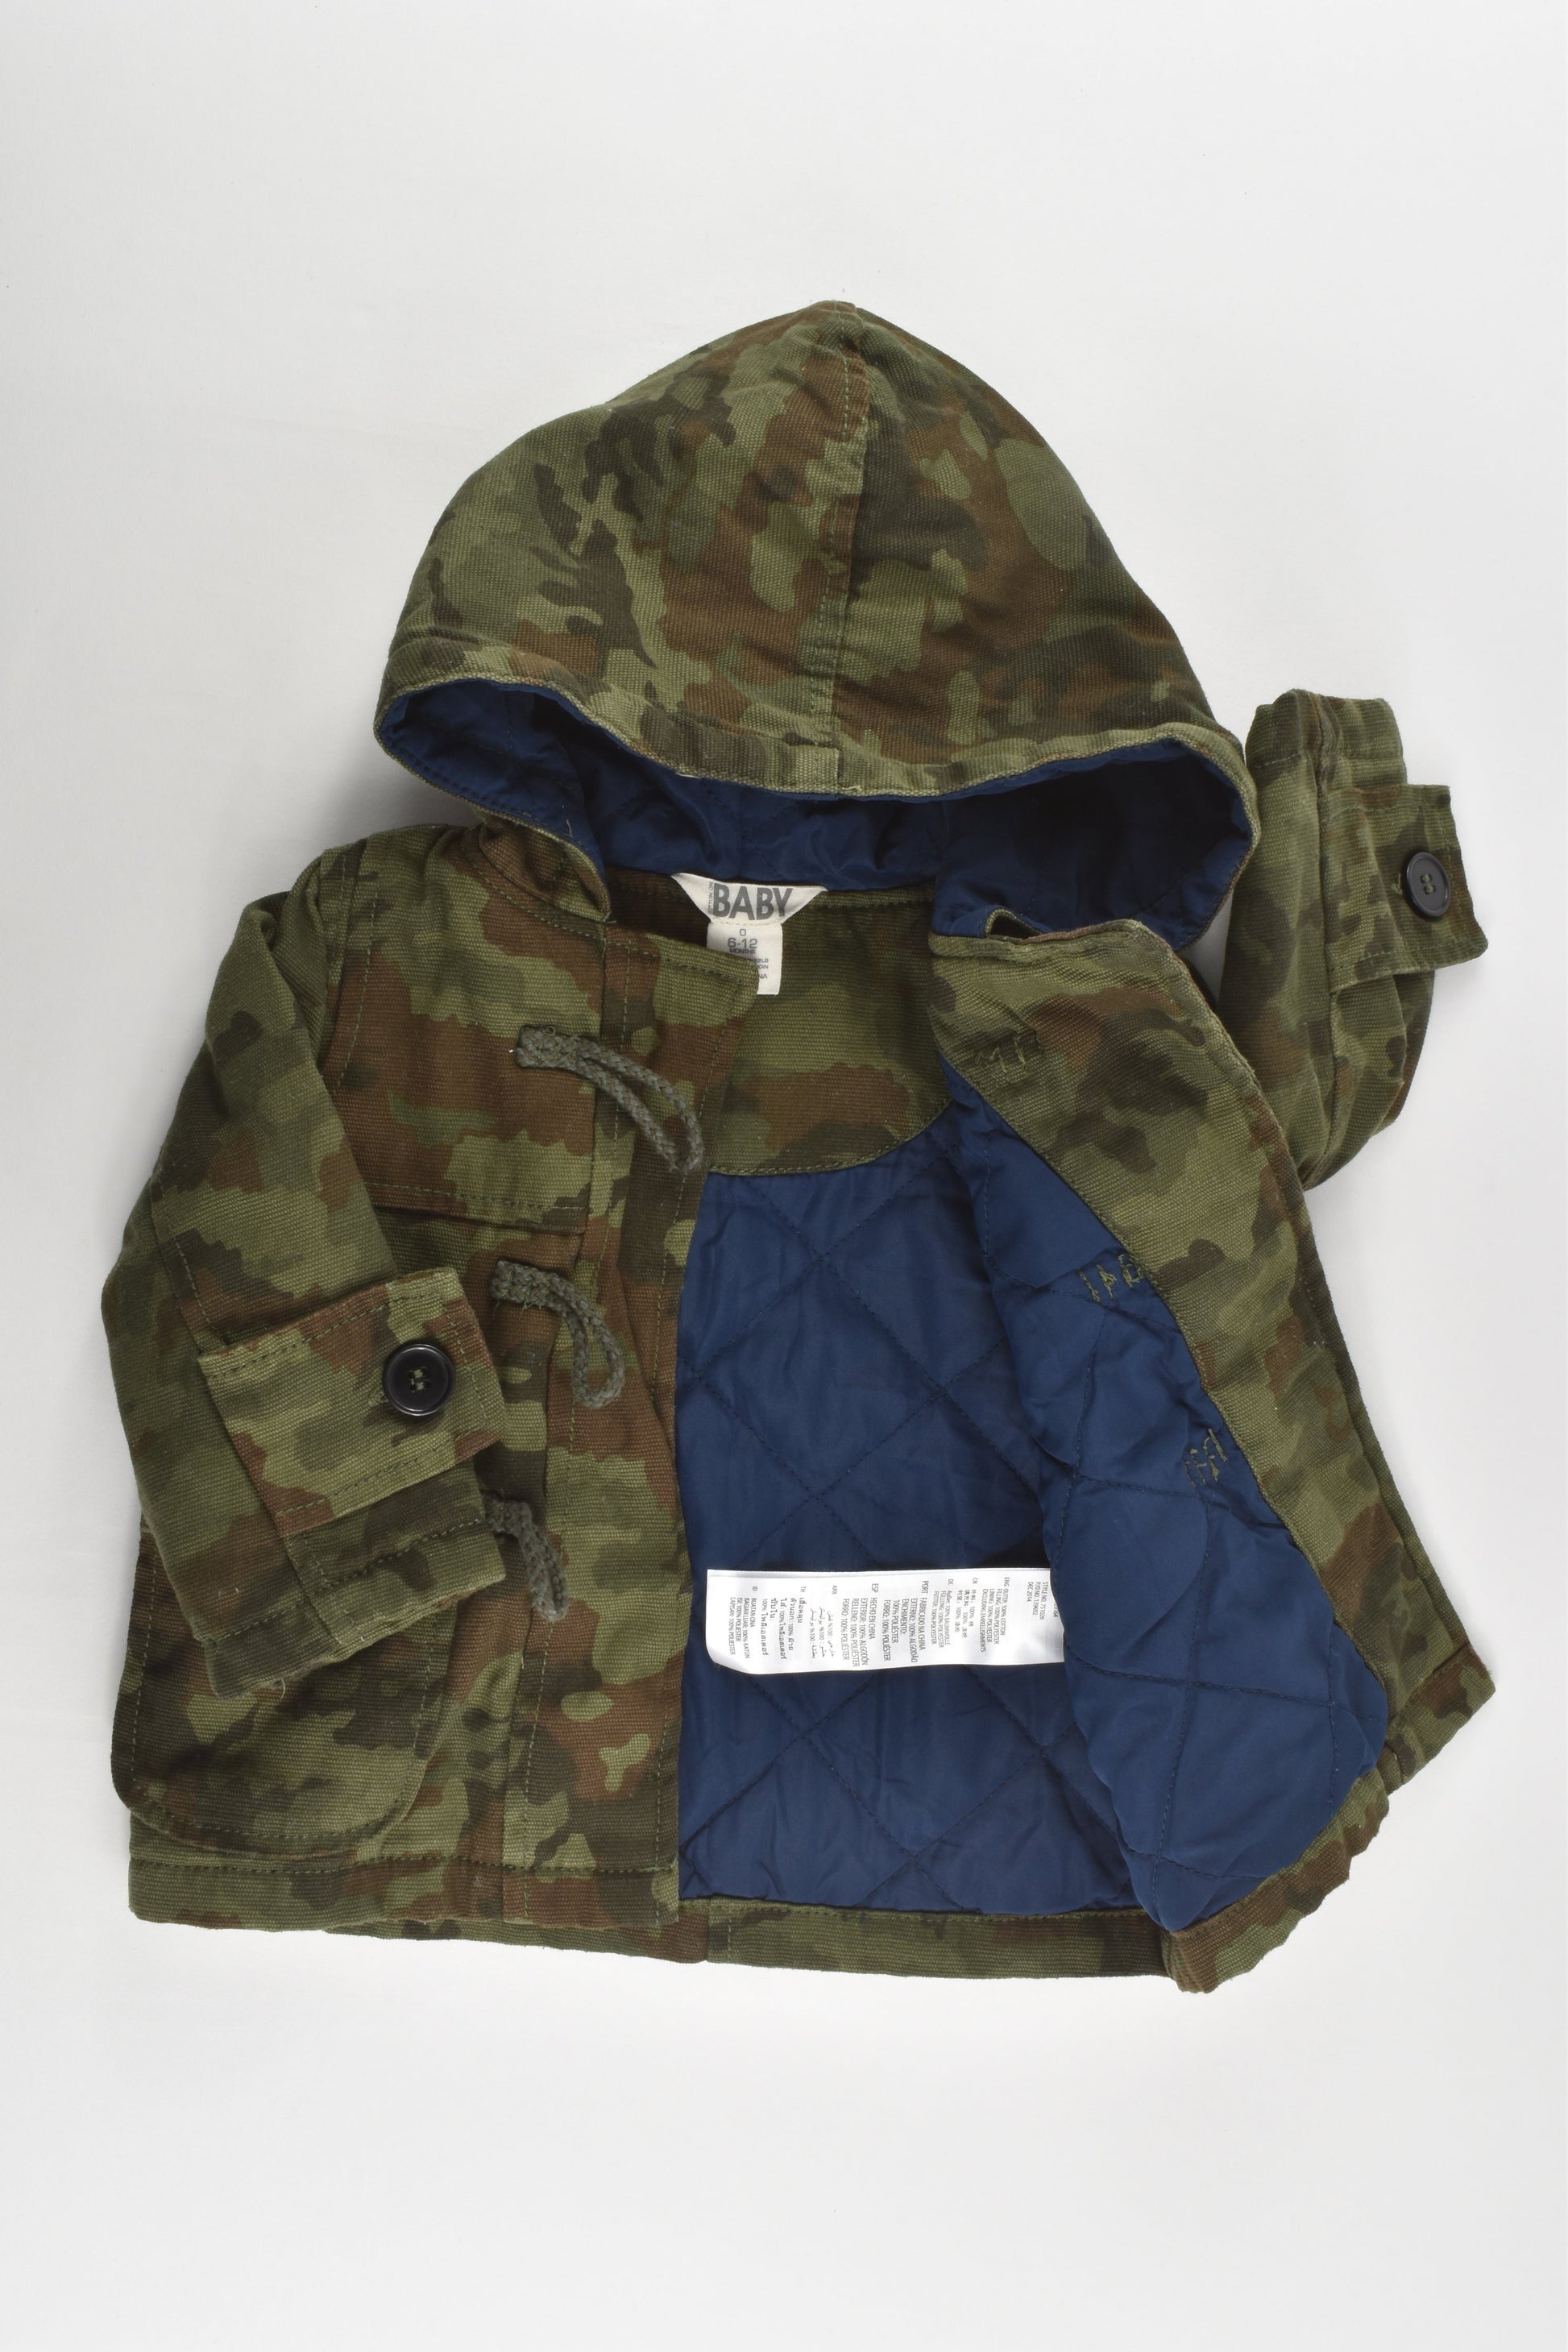 Cotton On Baby Size 0 (6-12 months) Camouflage Hooded Winter Jacket